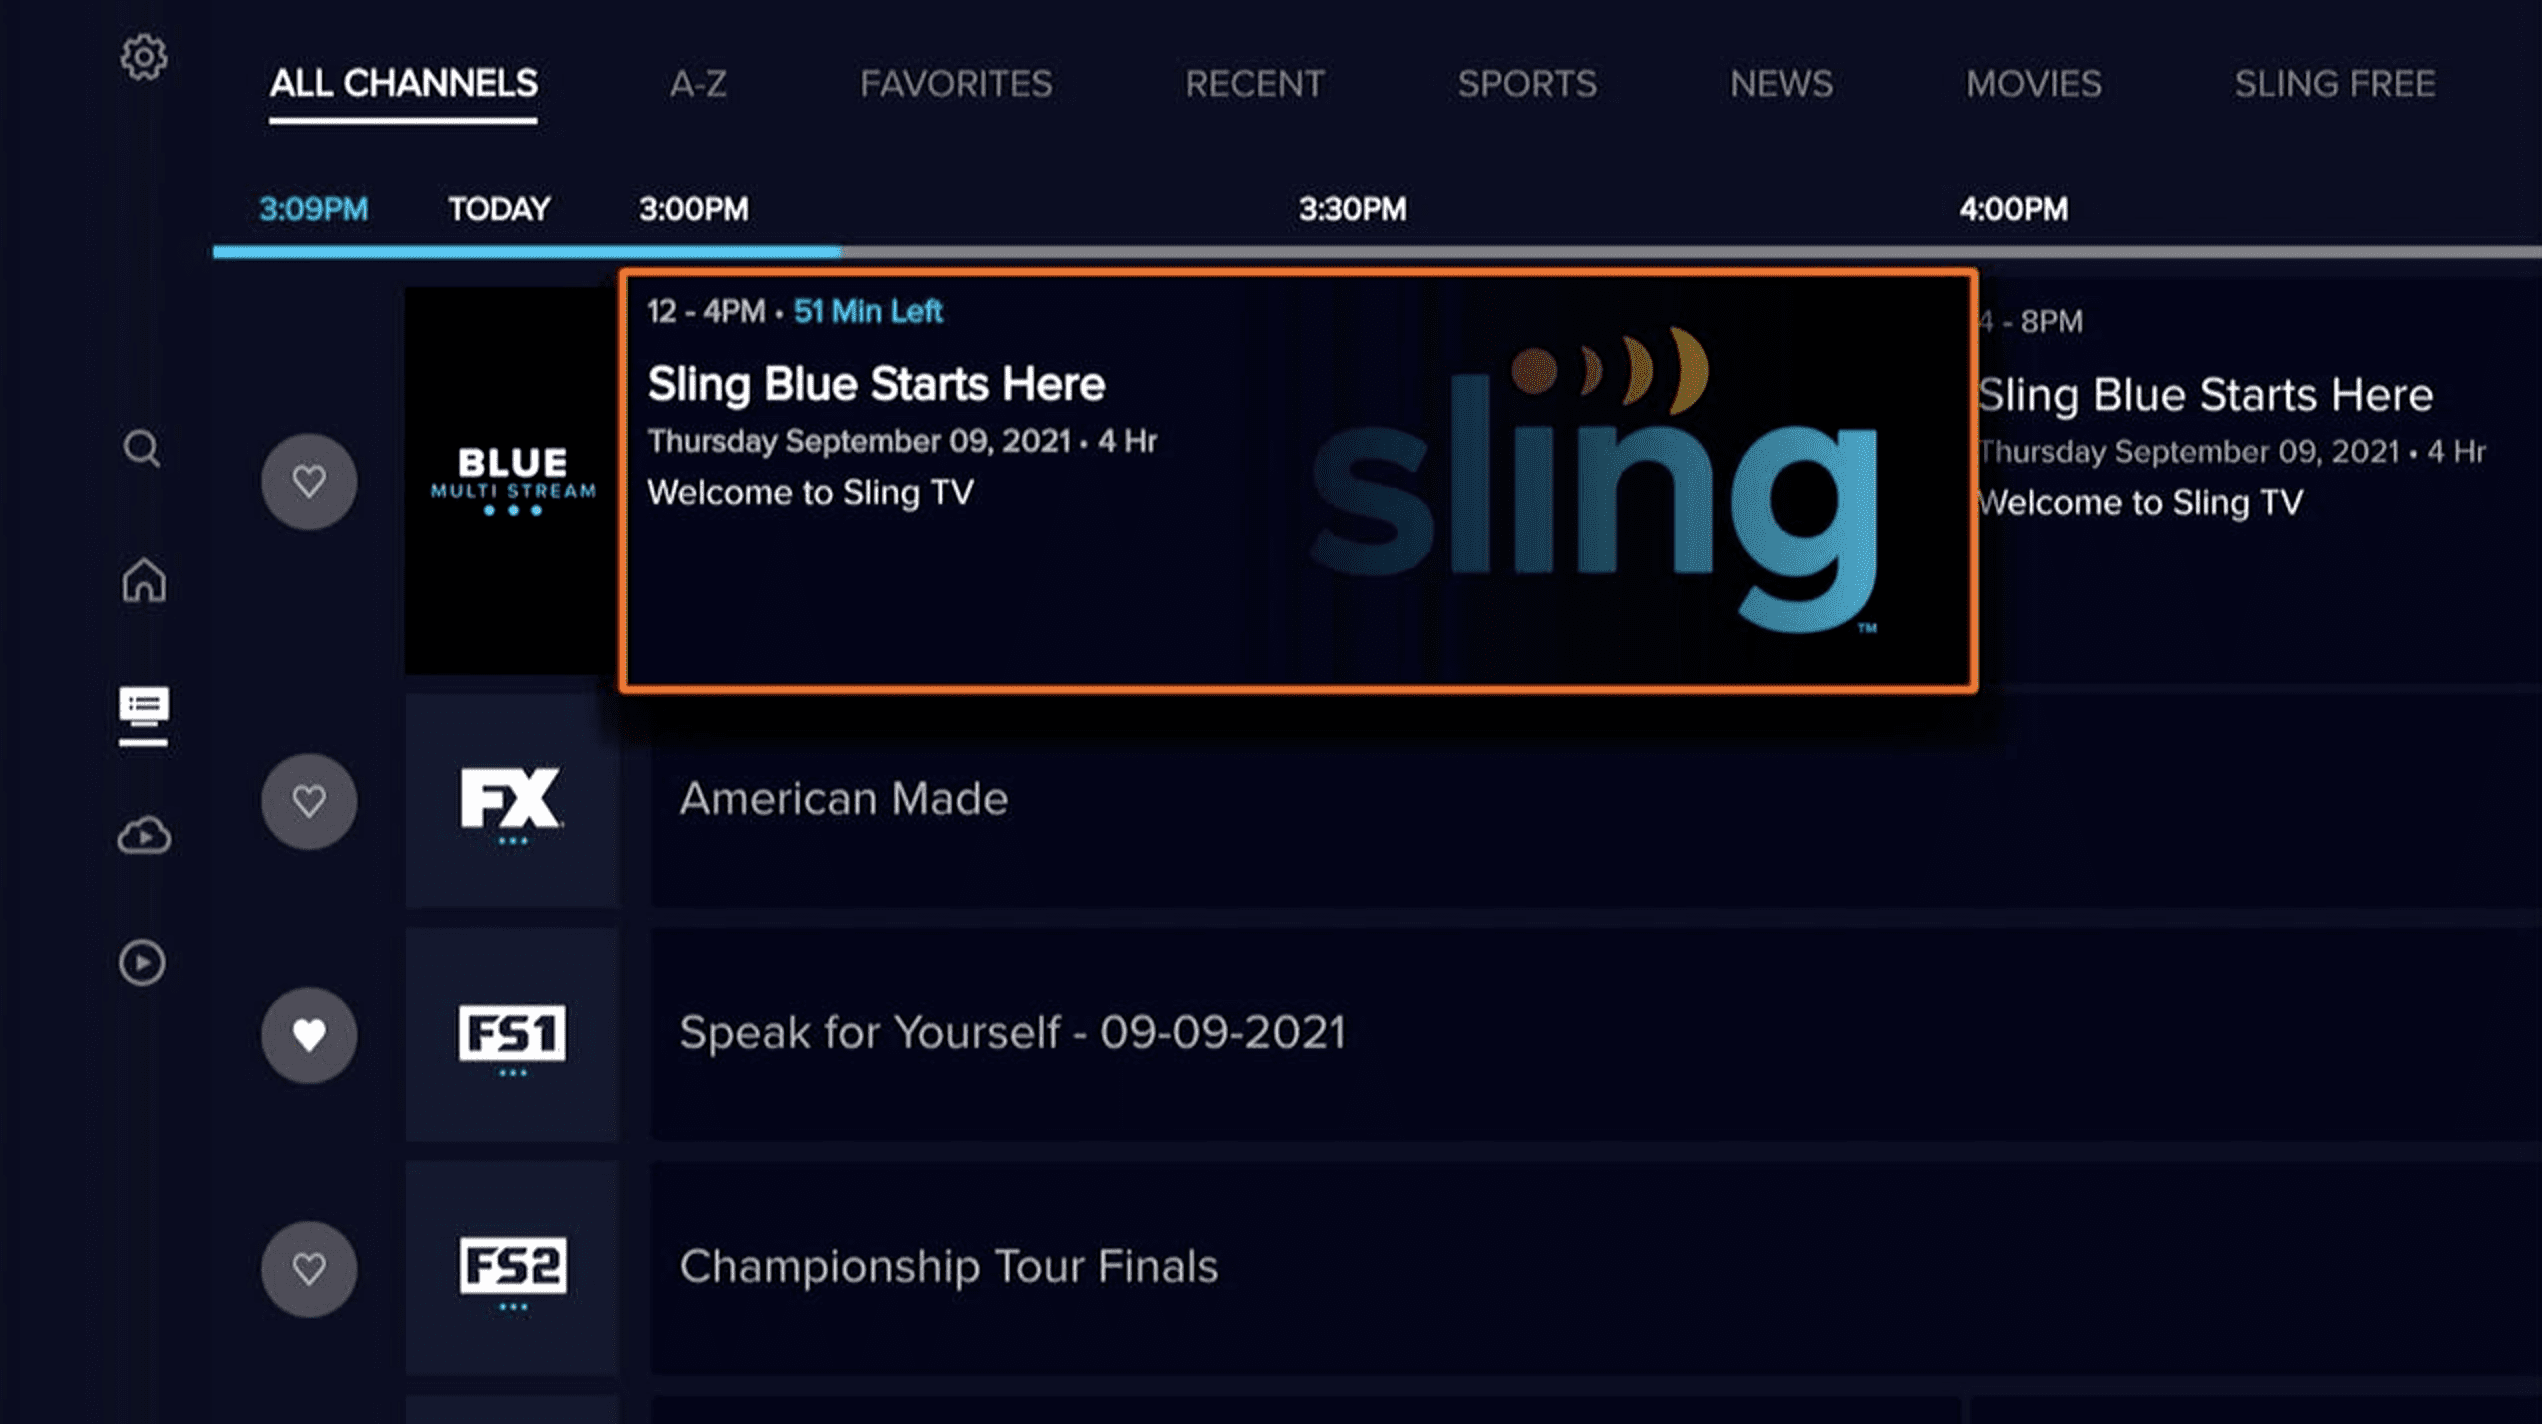 Sling TV on Roku during our review testing